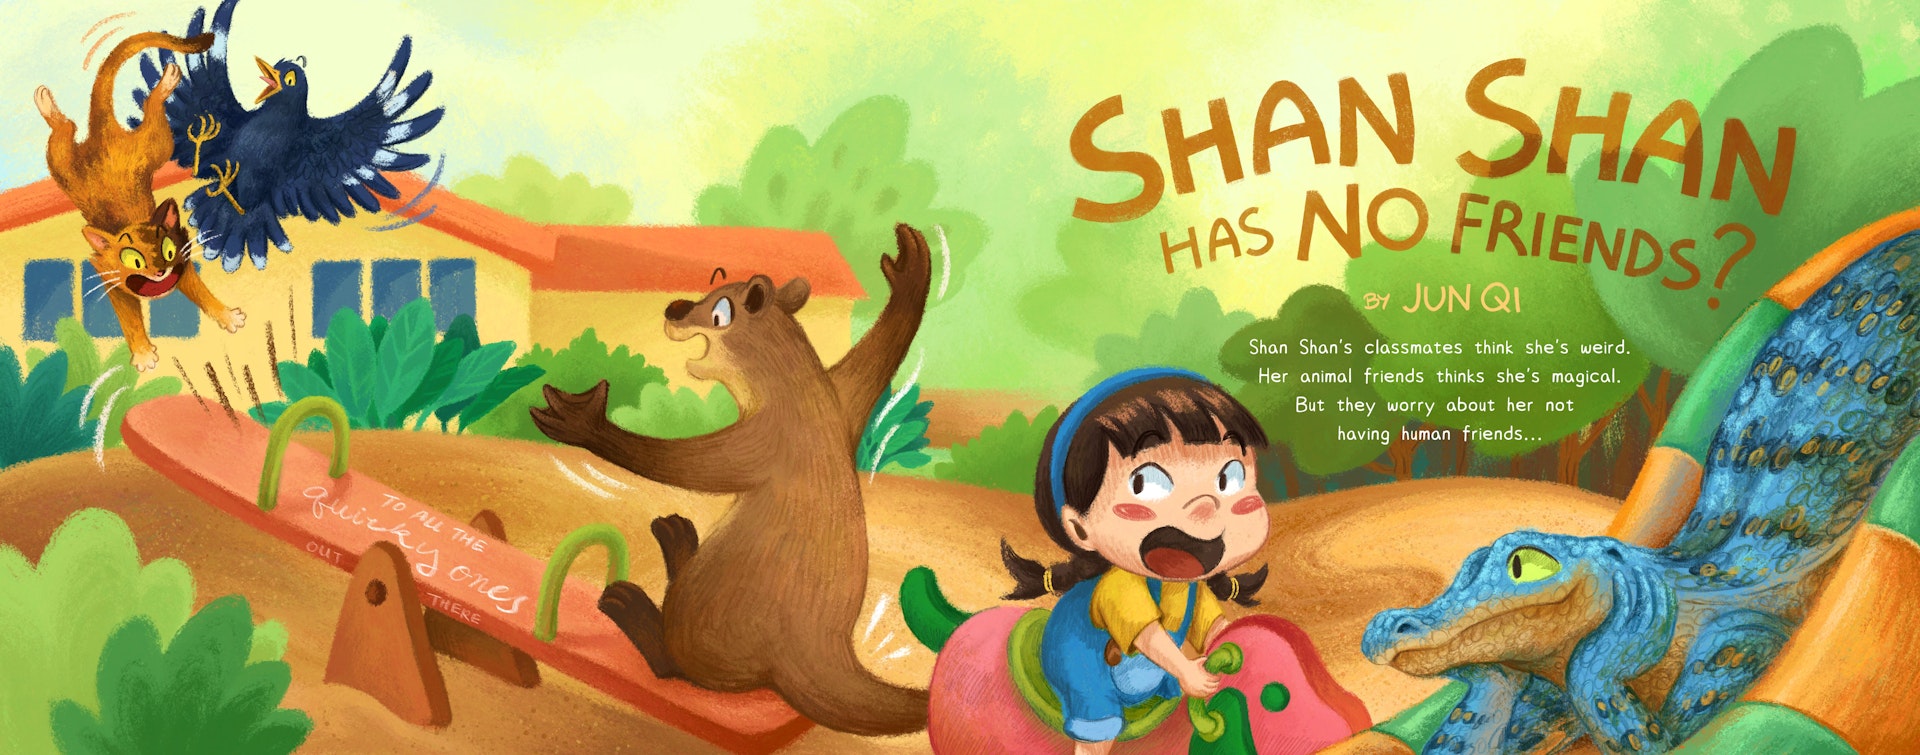 Double spread illustration showing Shan Shan and her animal friends playing at the playground in front of the preschool and park.